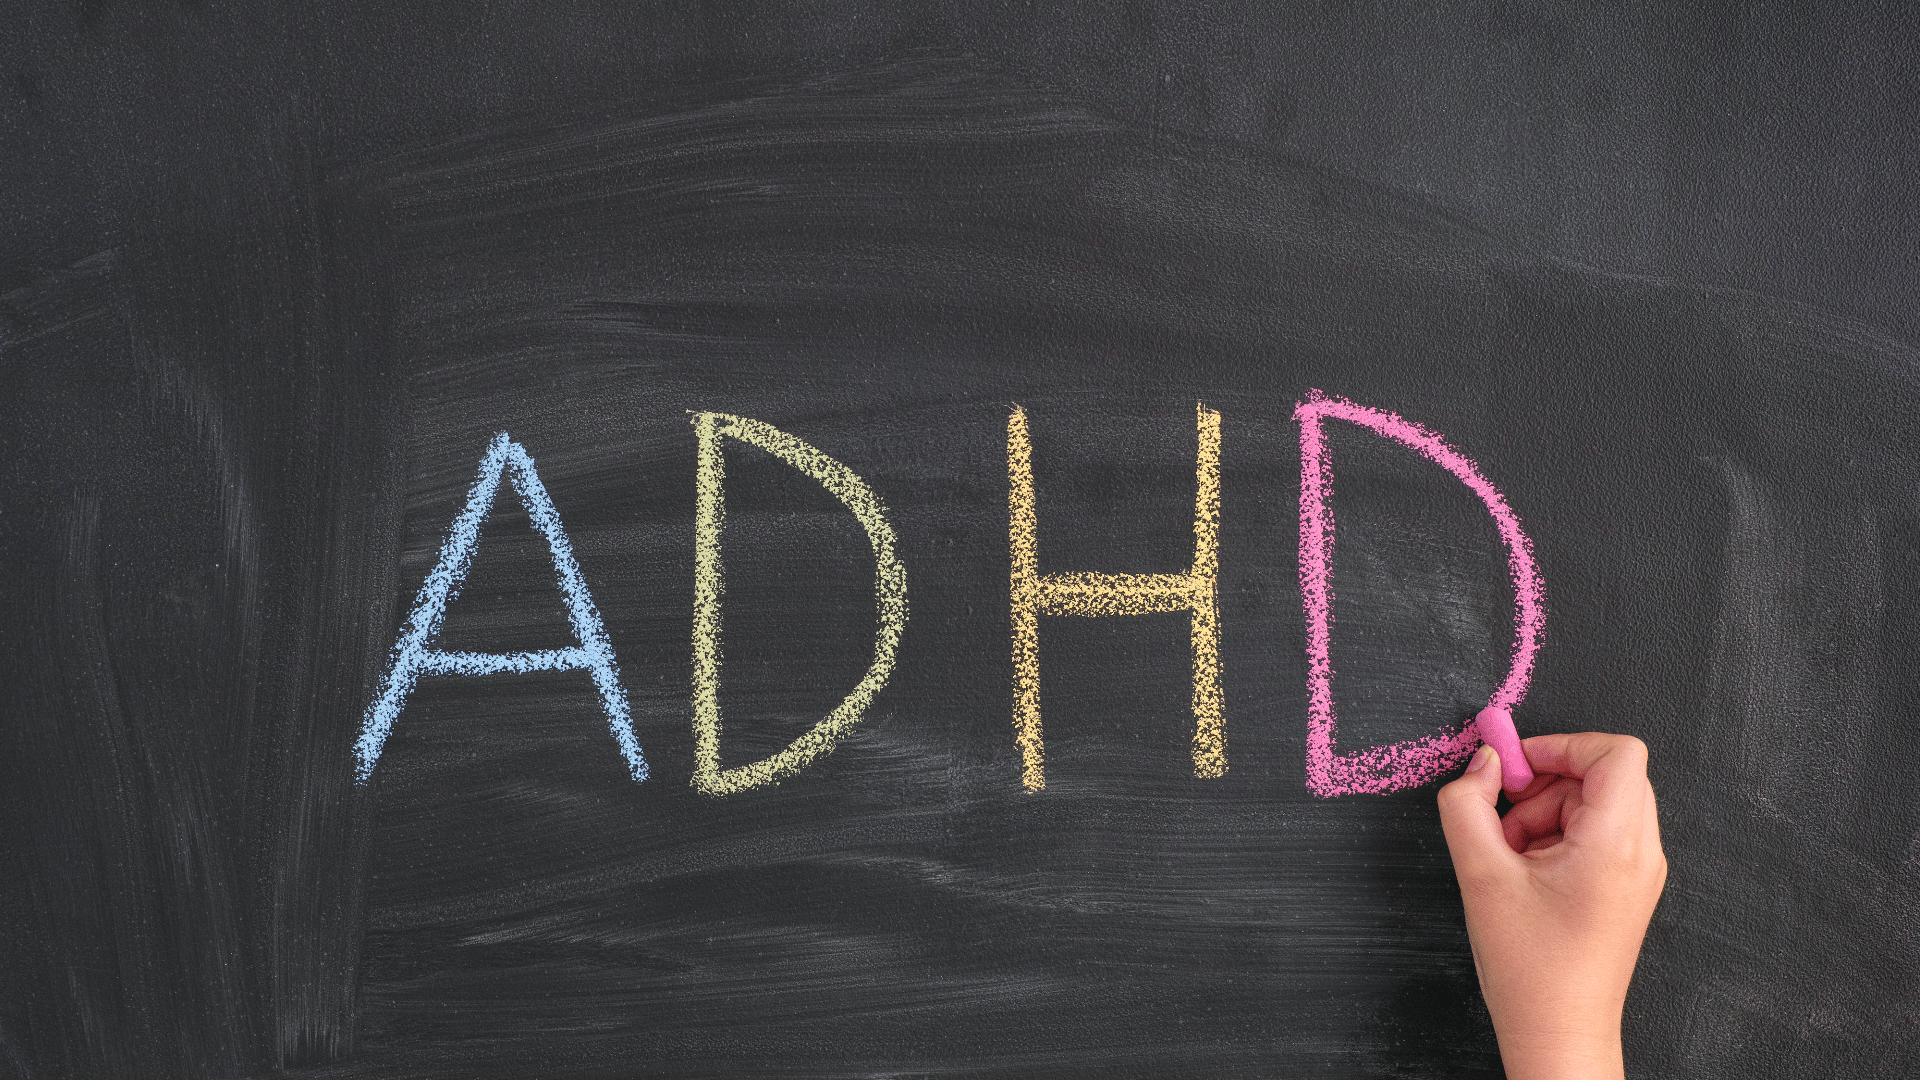 Treatment Options for Adult ADHD